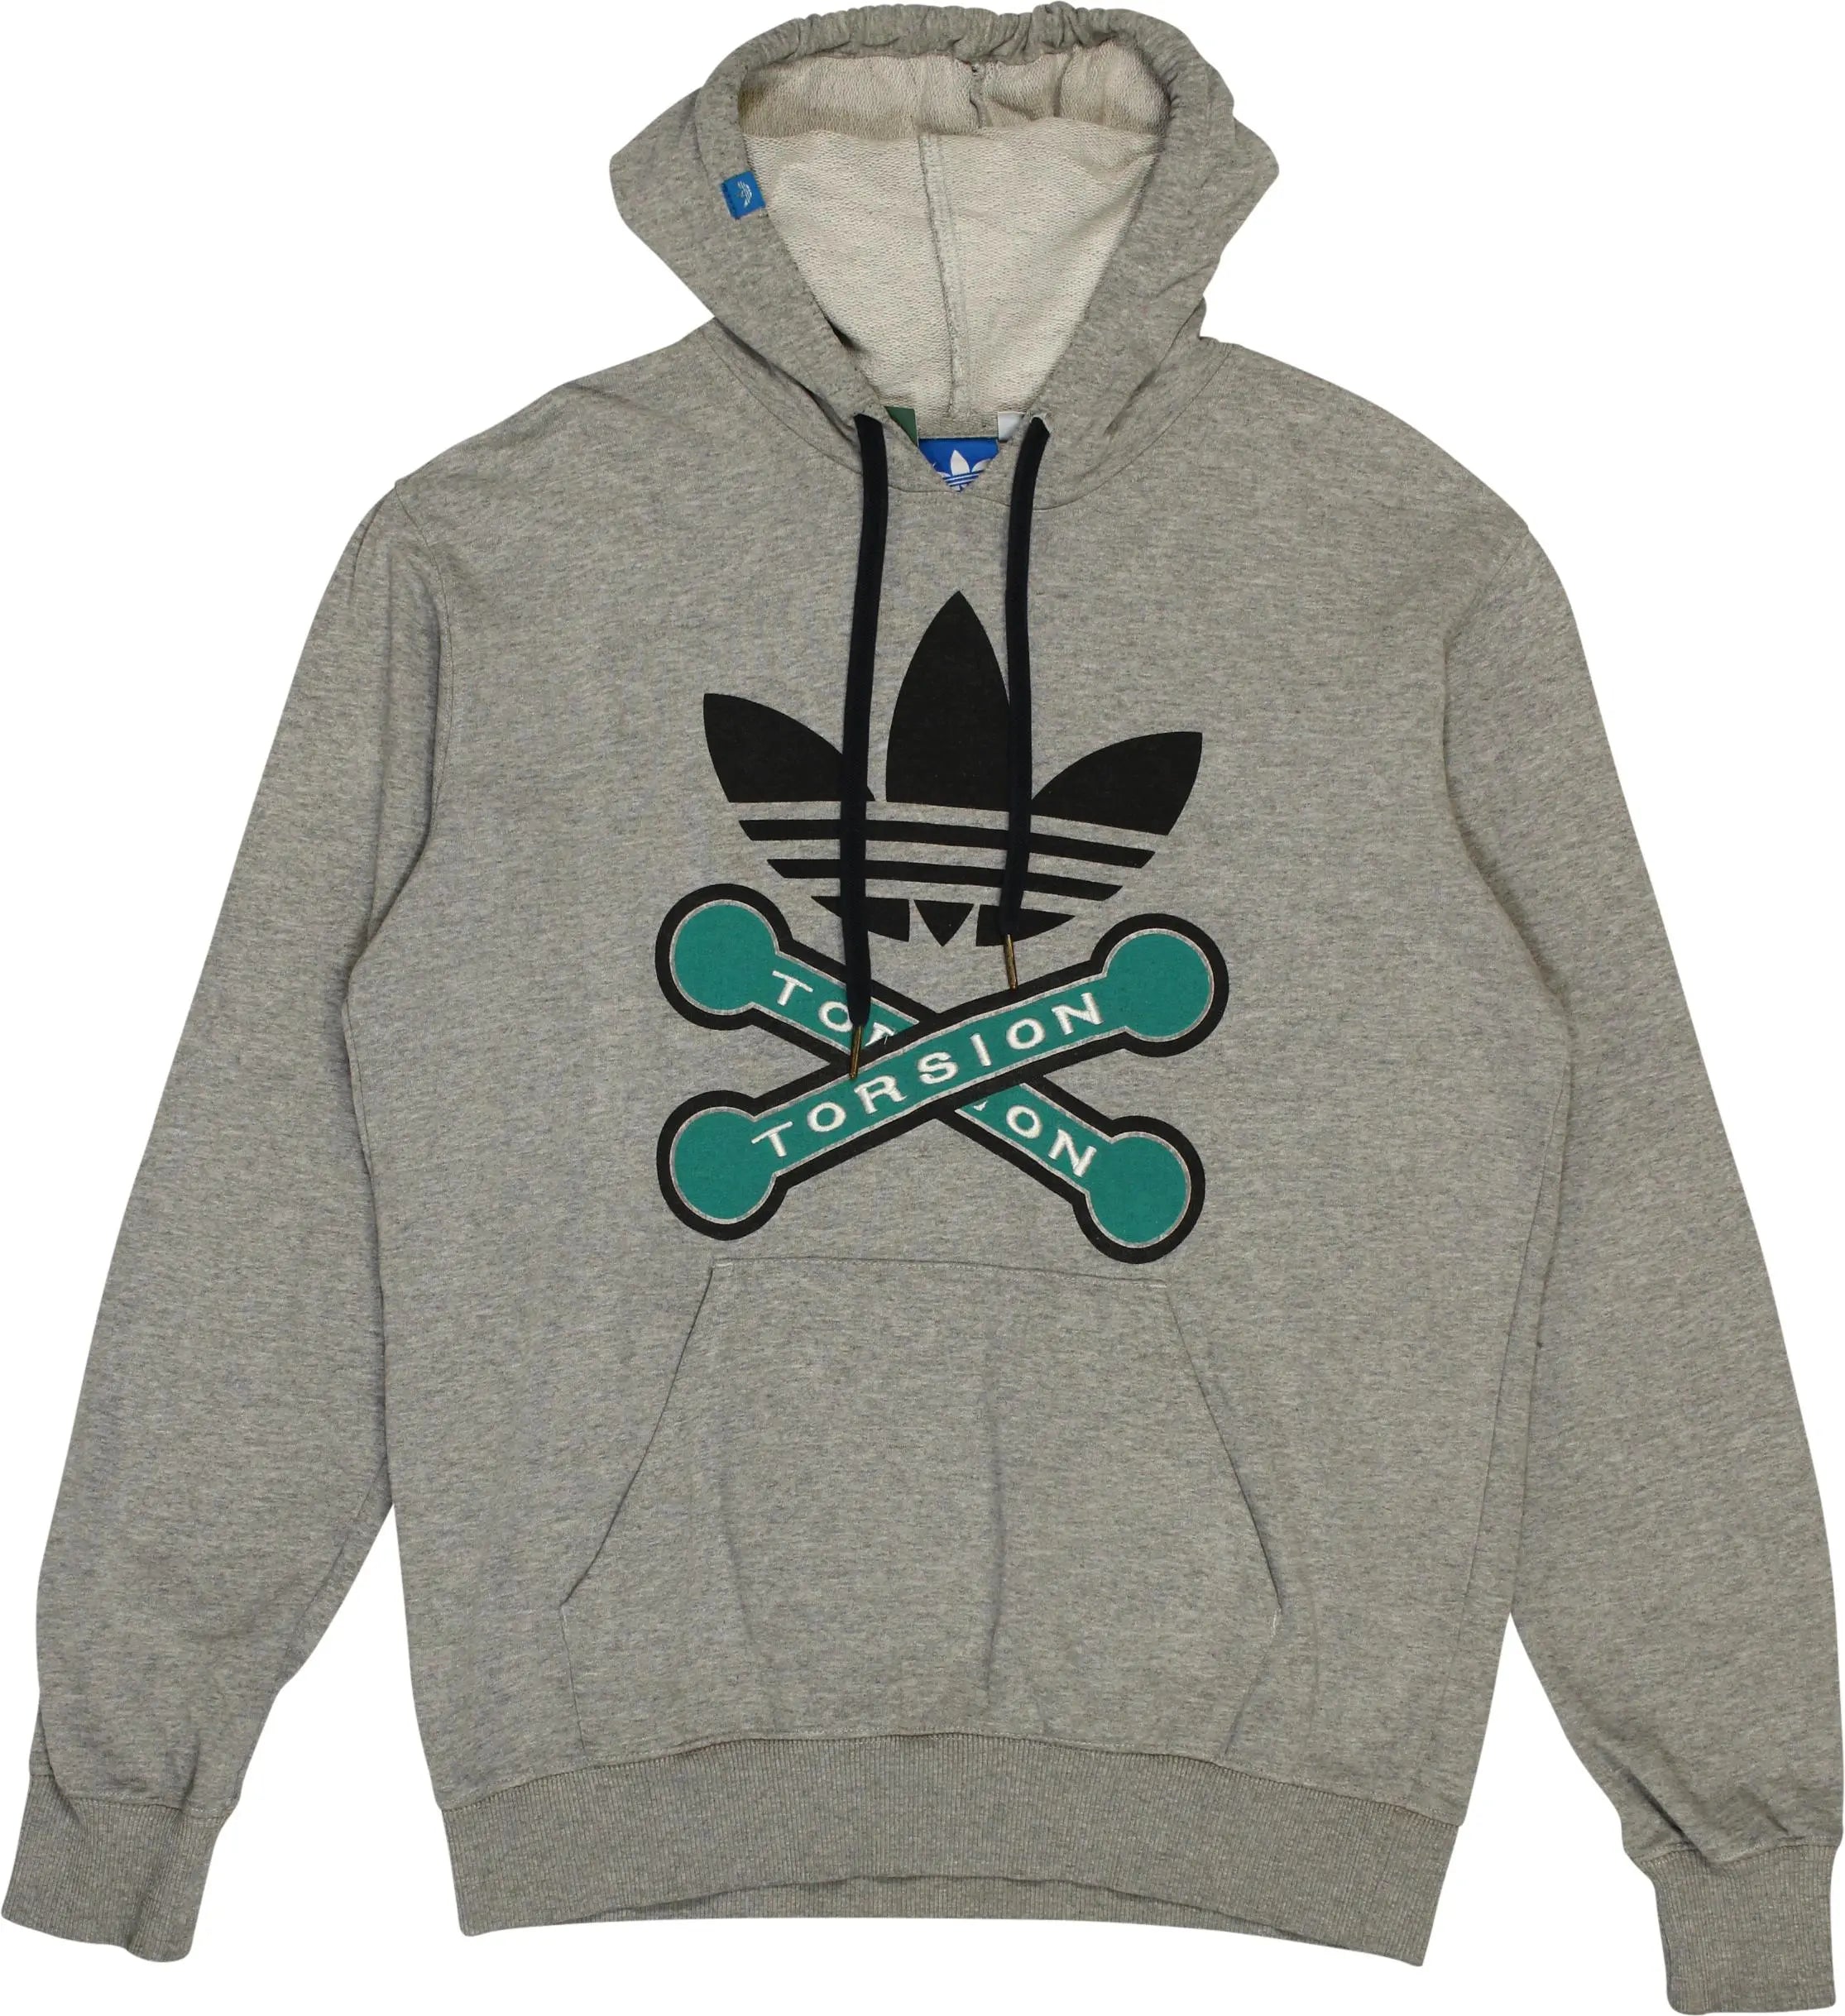 Adidas - Grey Hoodie by Adidas- ThriftTale.com - Vintage and second handclothing